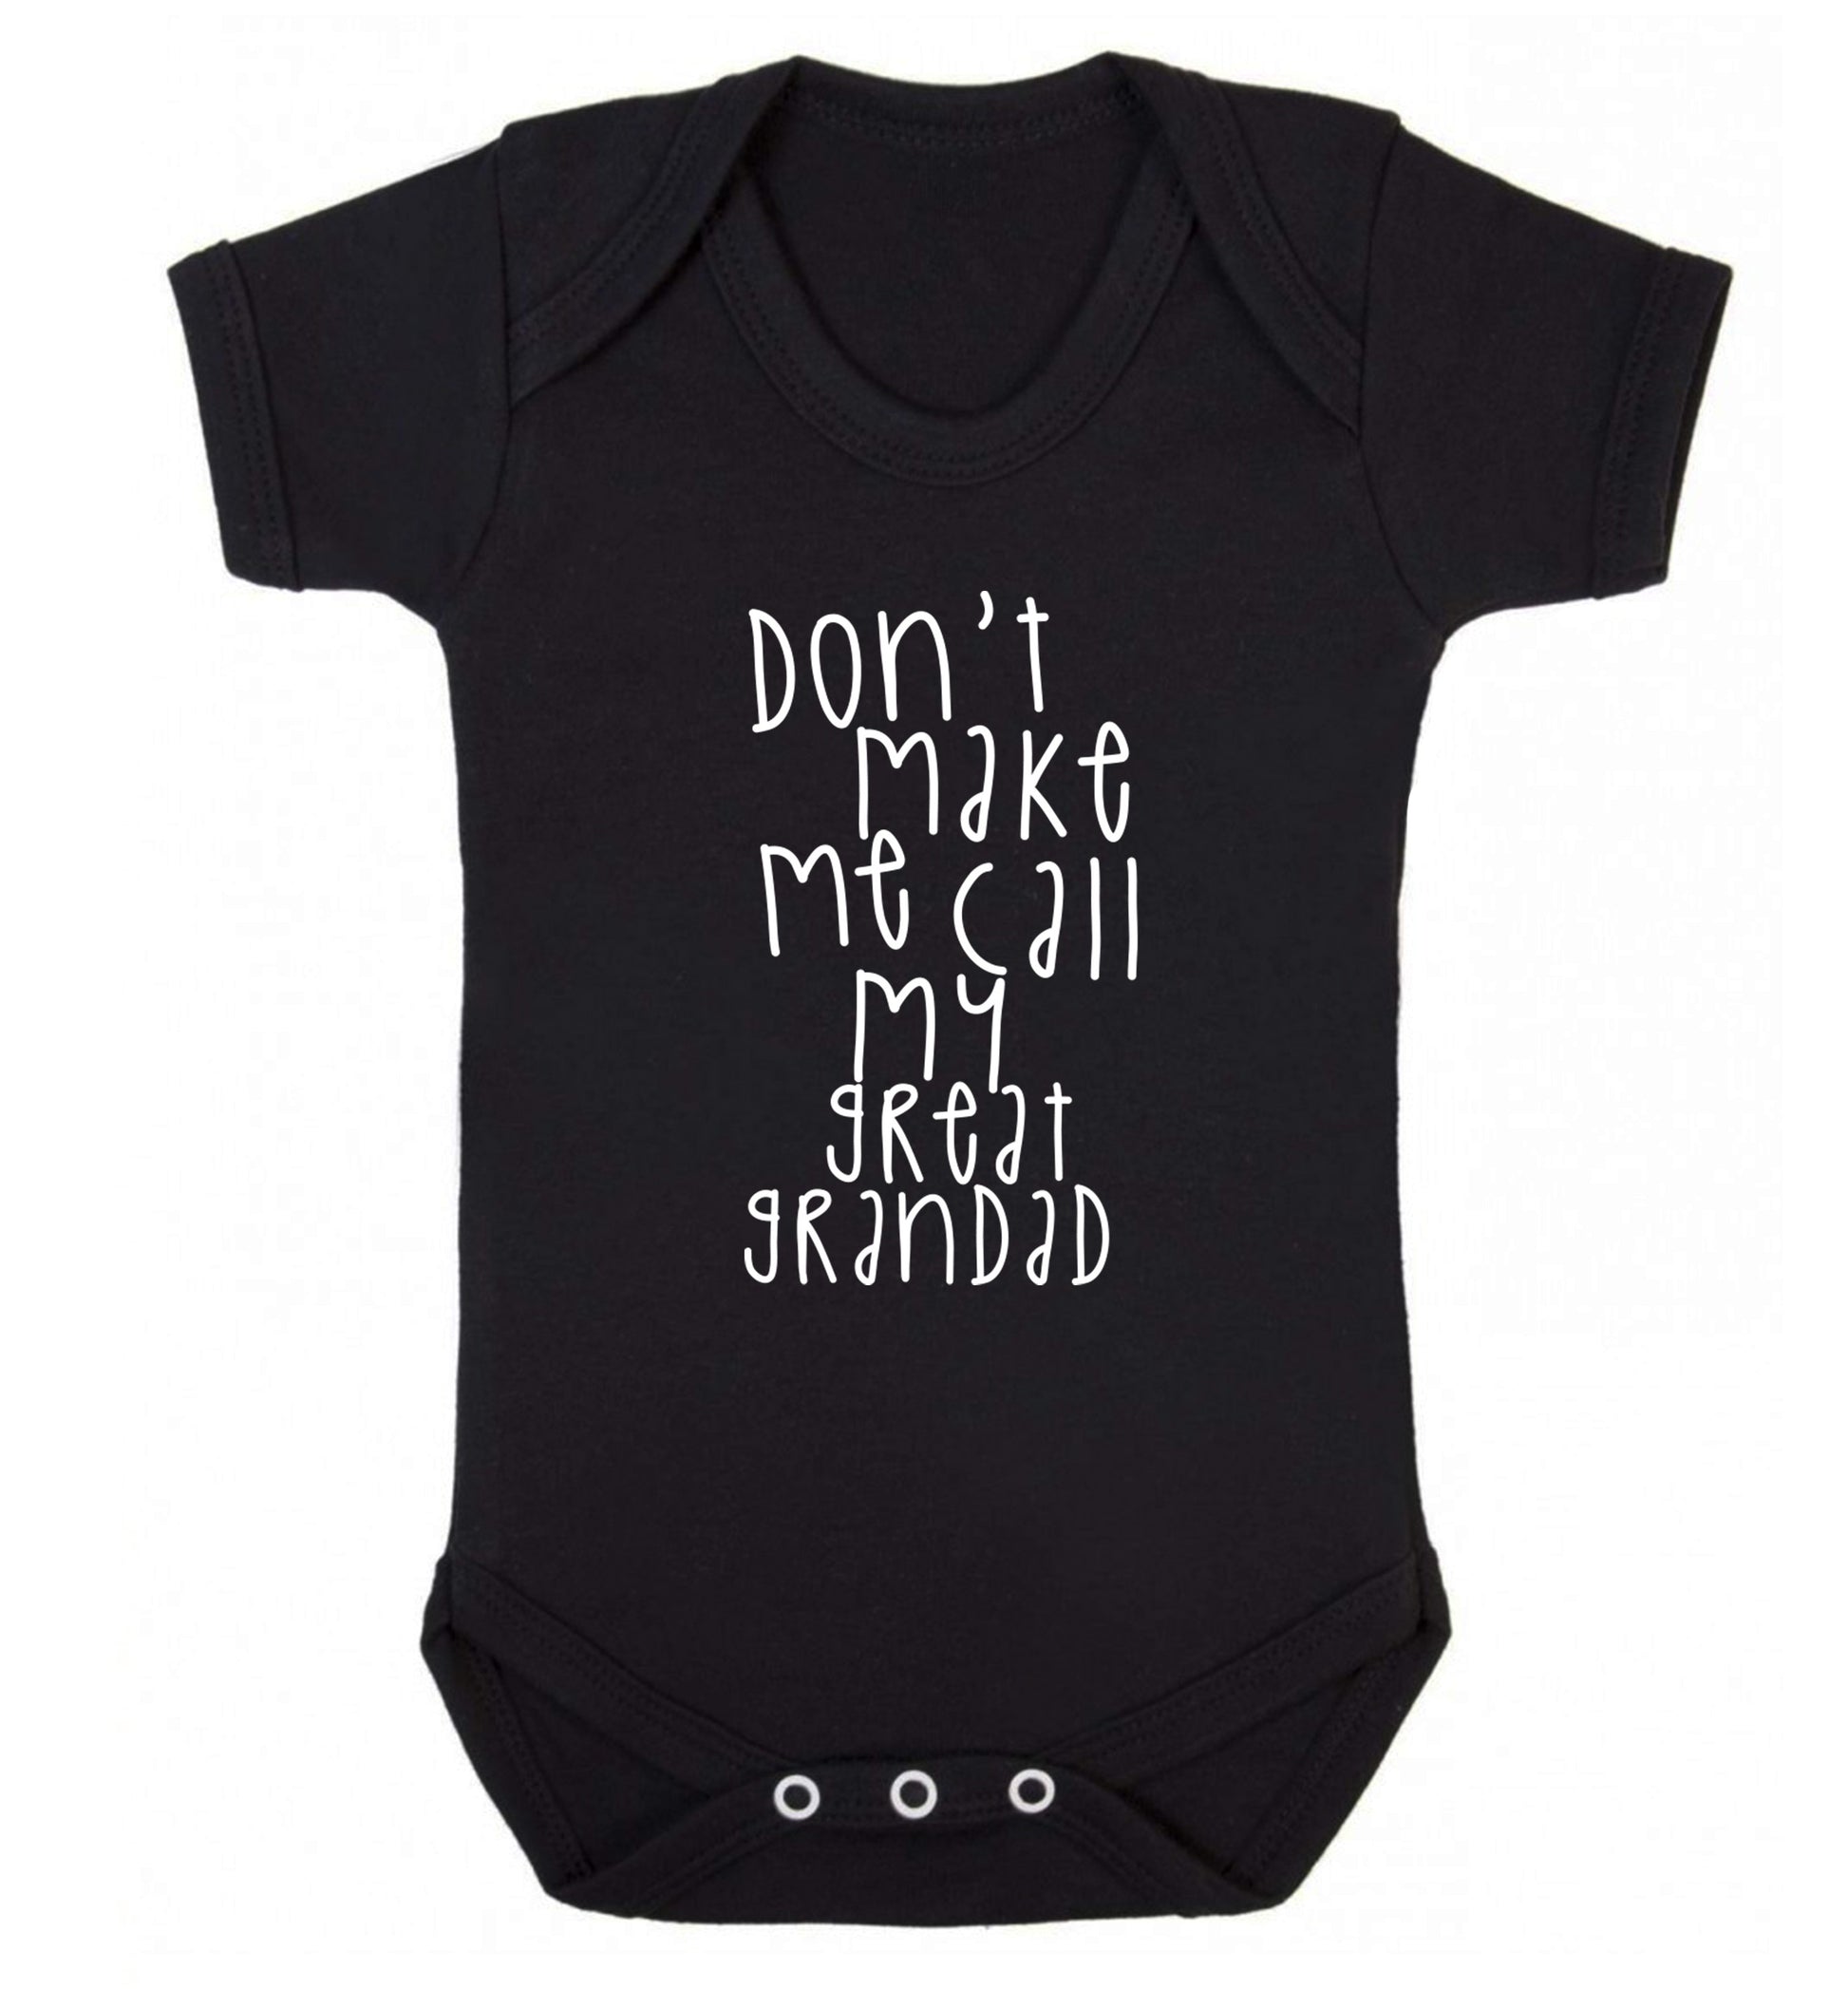 Don't make me call my great grandad Baby Vest black 18-24 months